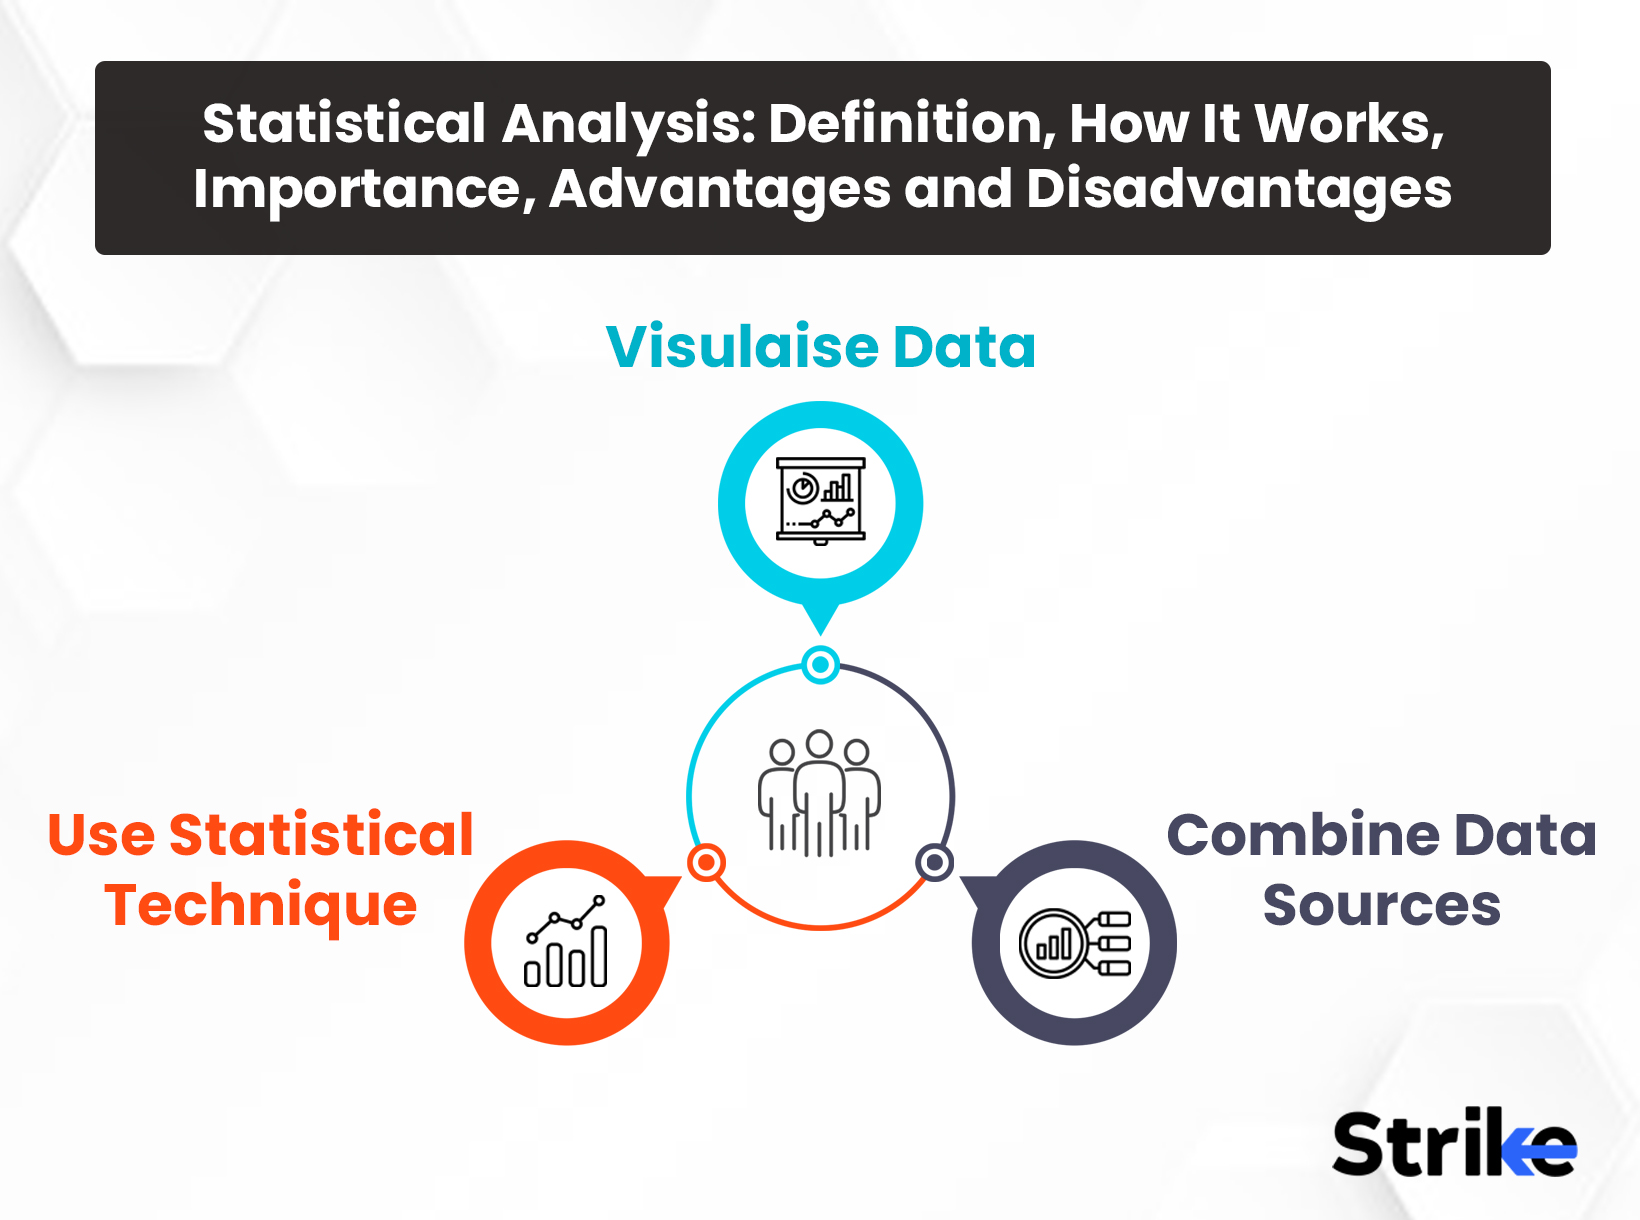 Statistical Analysis: Definition, How It Works, Importance, Advantages and Disadvantages